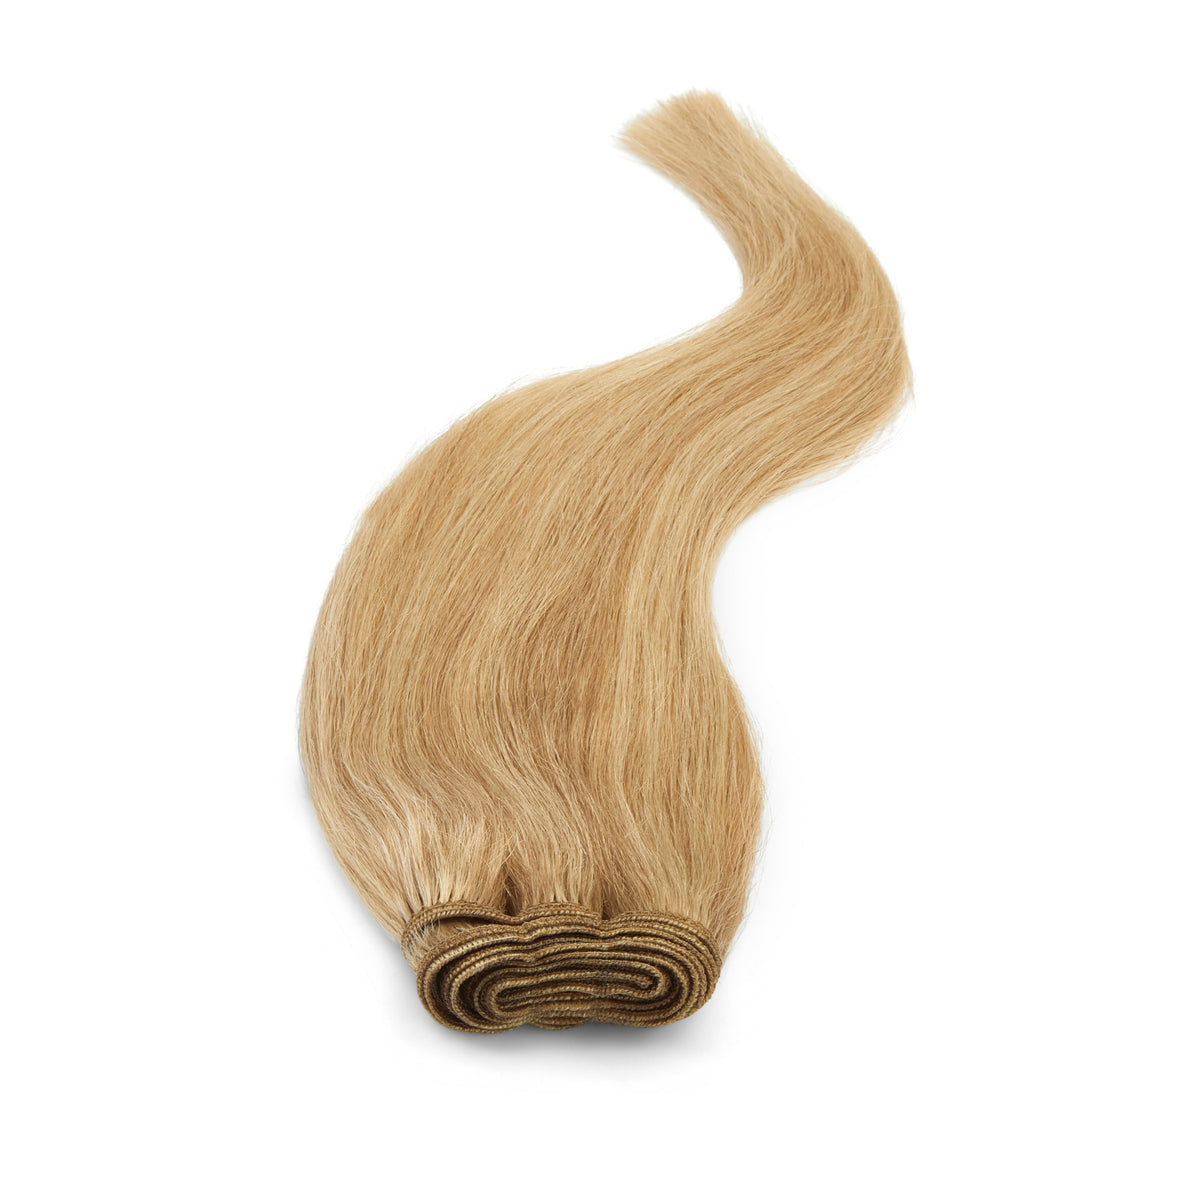 a piece of blonde hair on a white background